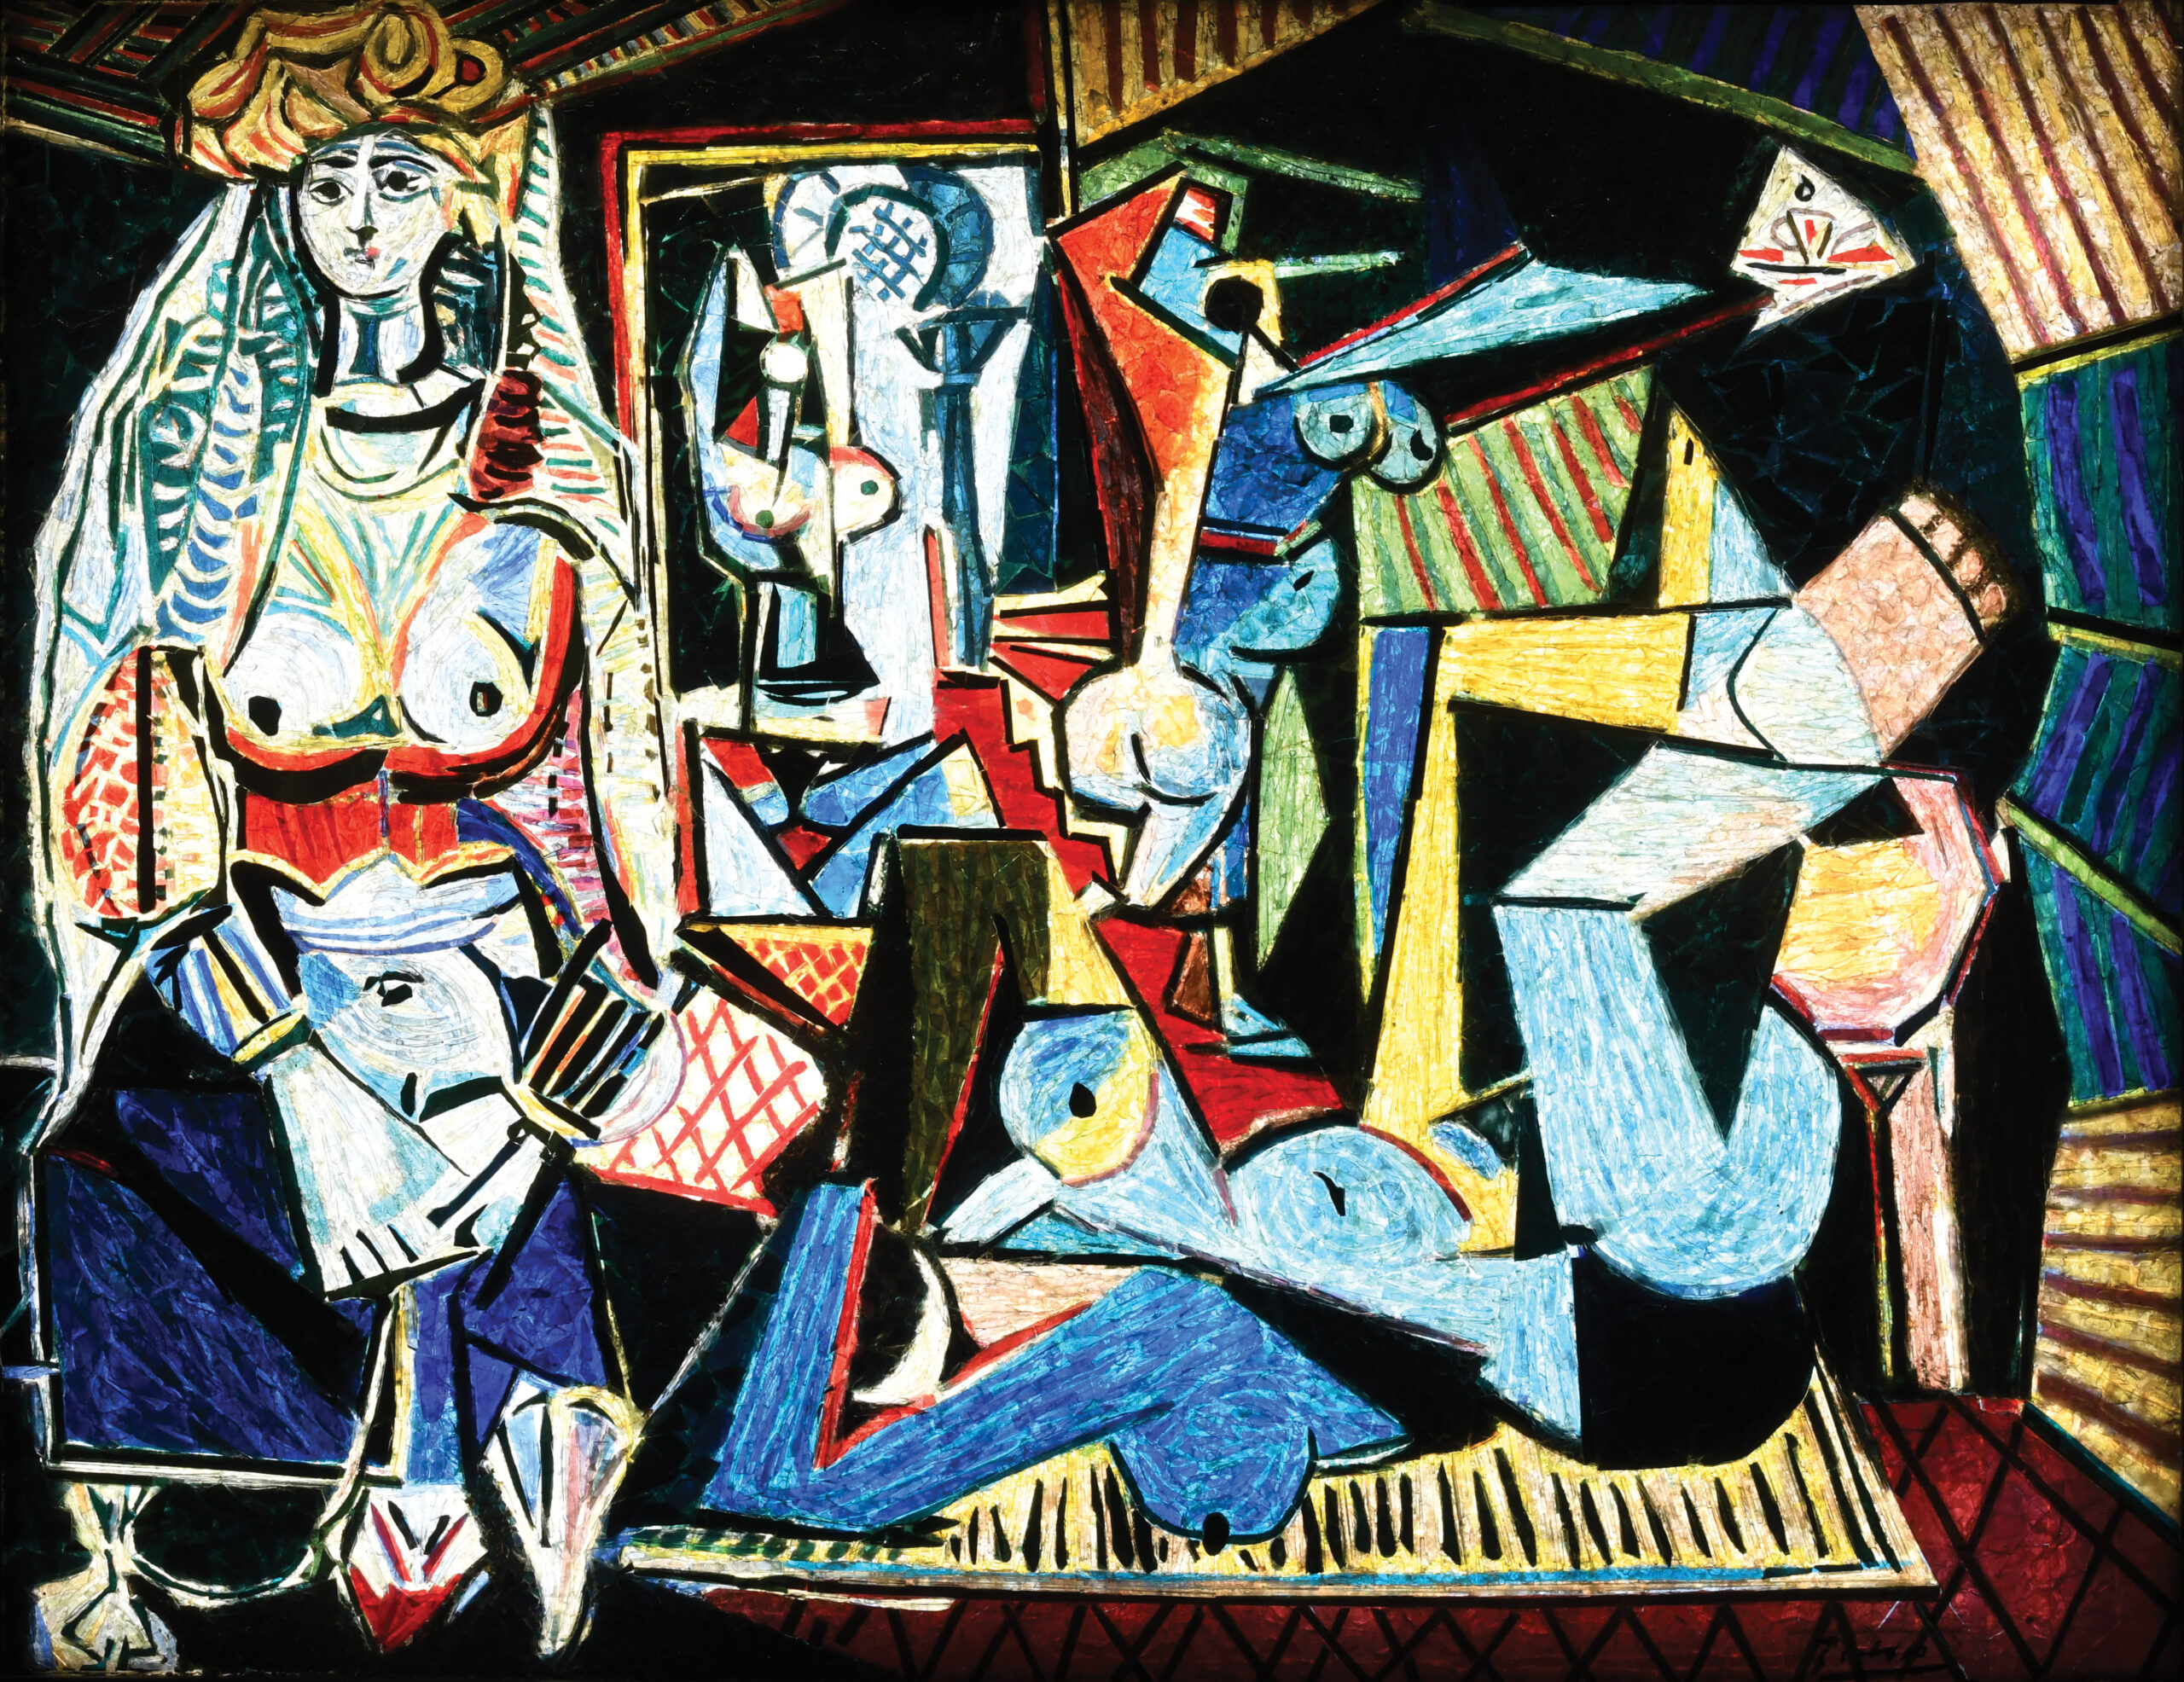 Strokes Of Genius: 50 years after his passing, the art world muses on Picasso’s magic and missteps